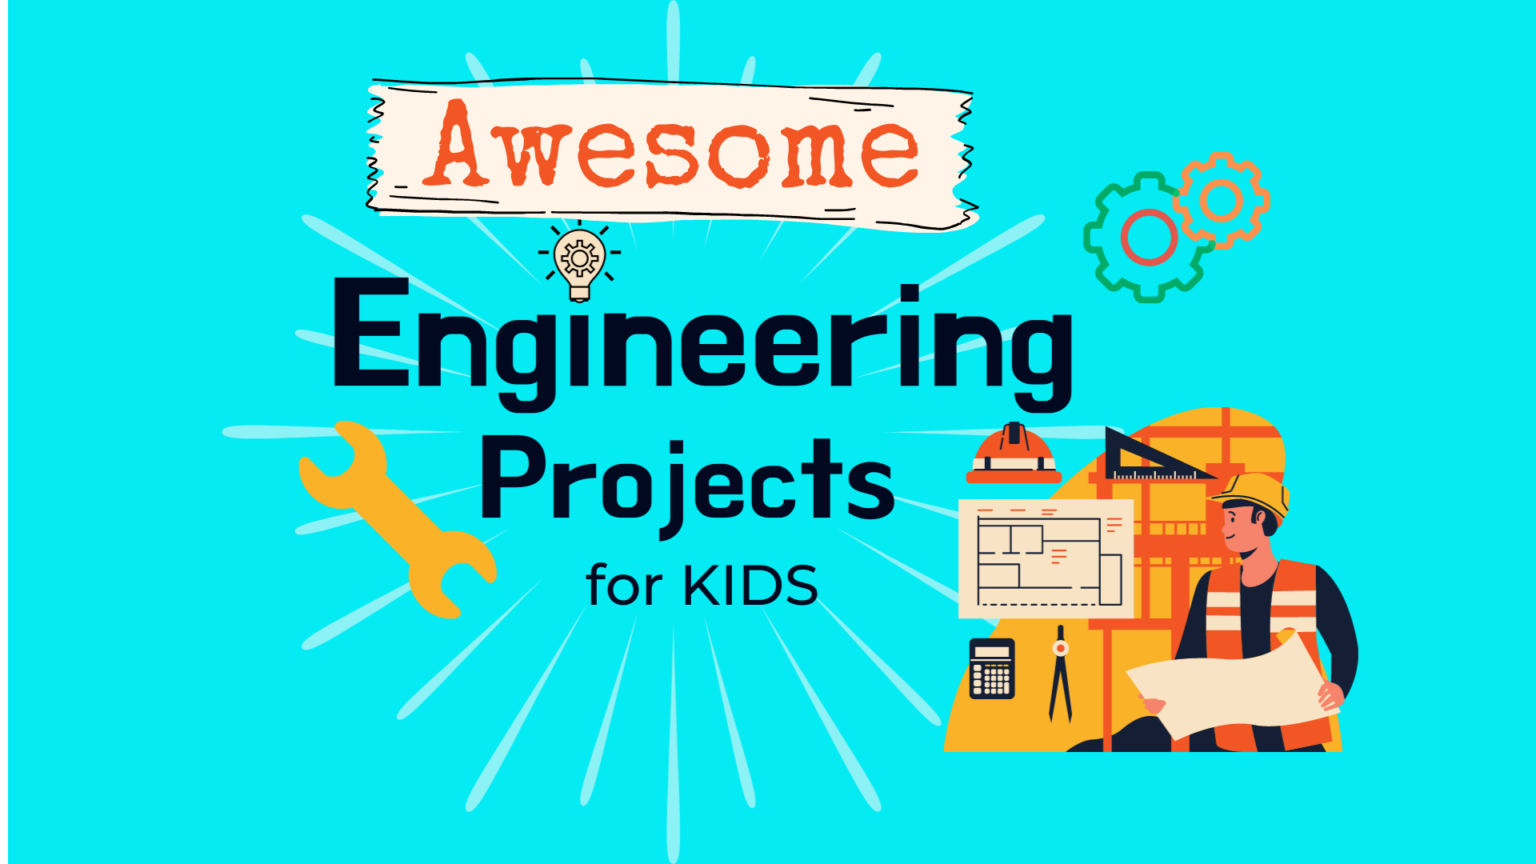 engineering-projects-for-kids-wizkids-club